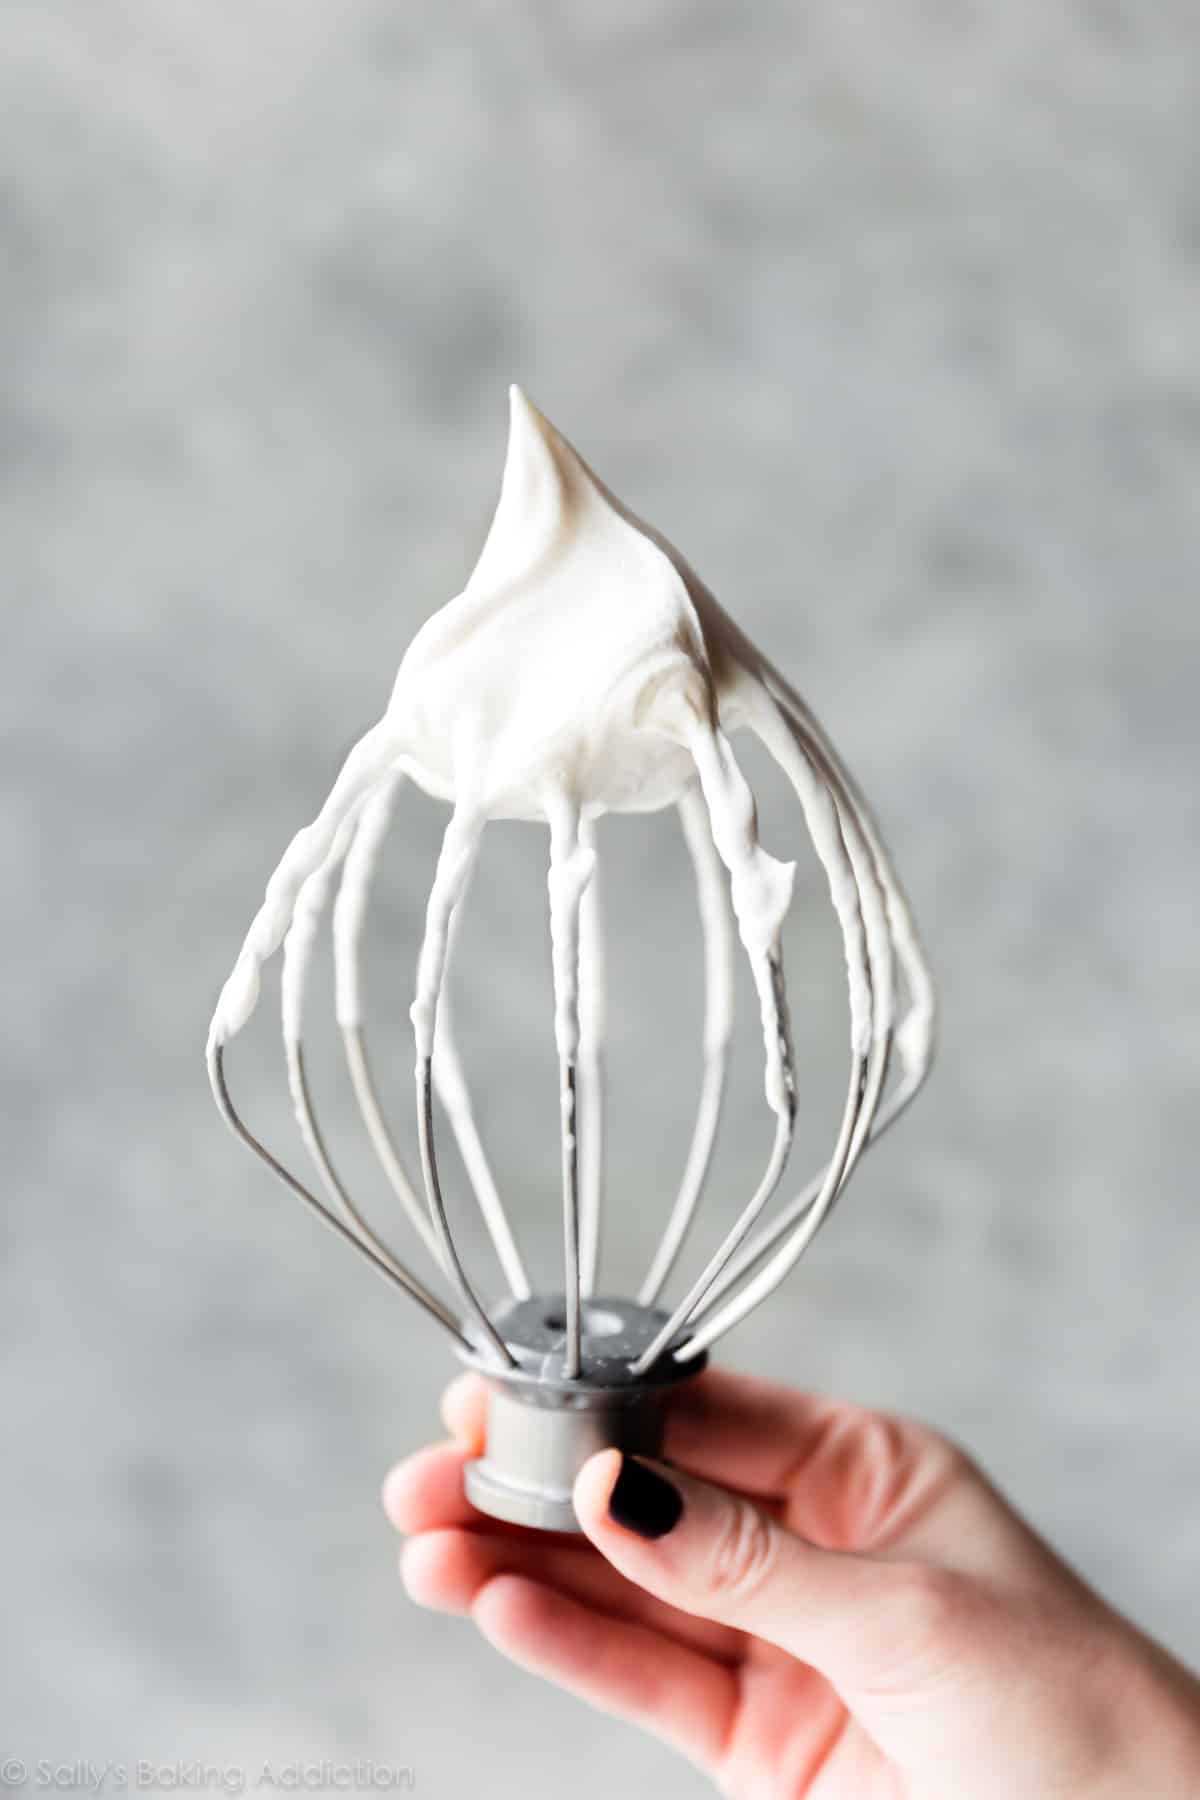 hand with whisk attachment with whipped cream